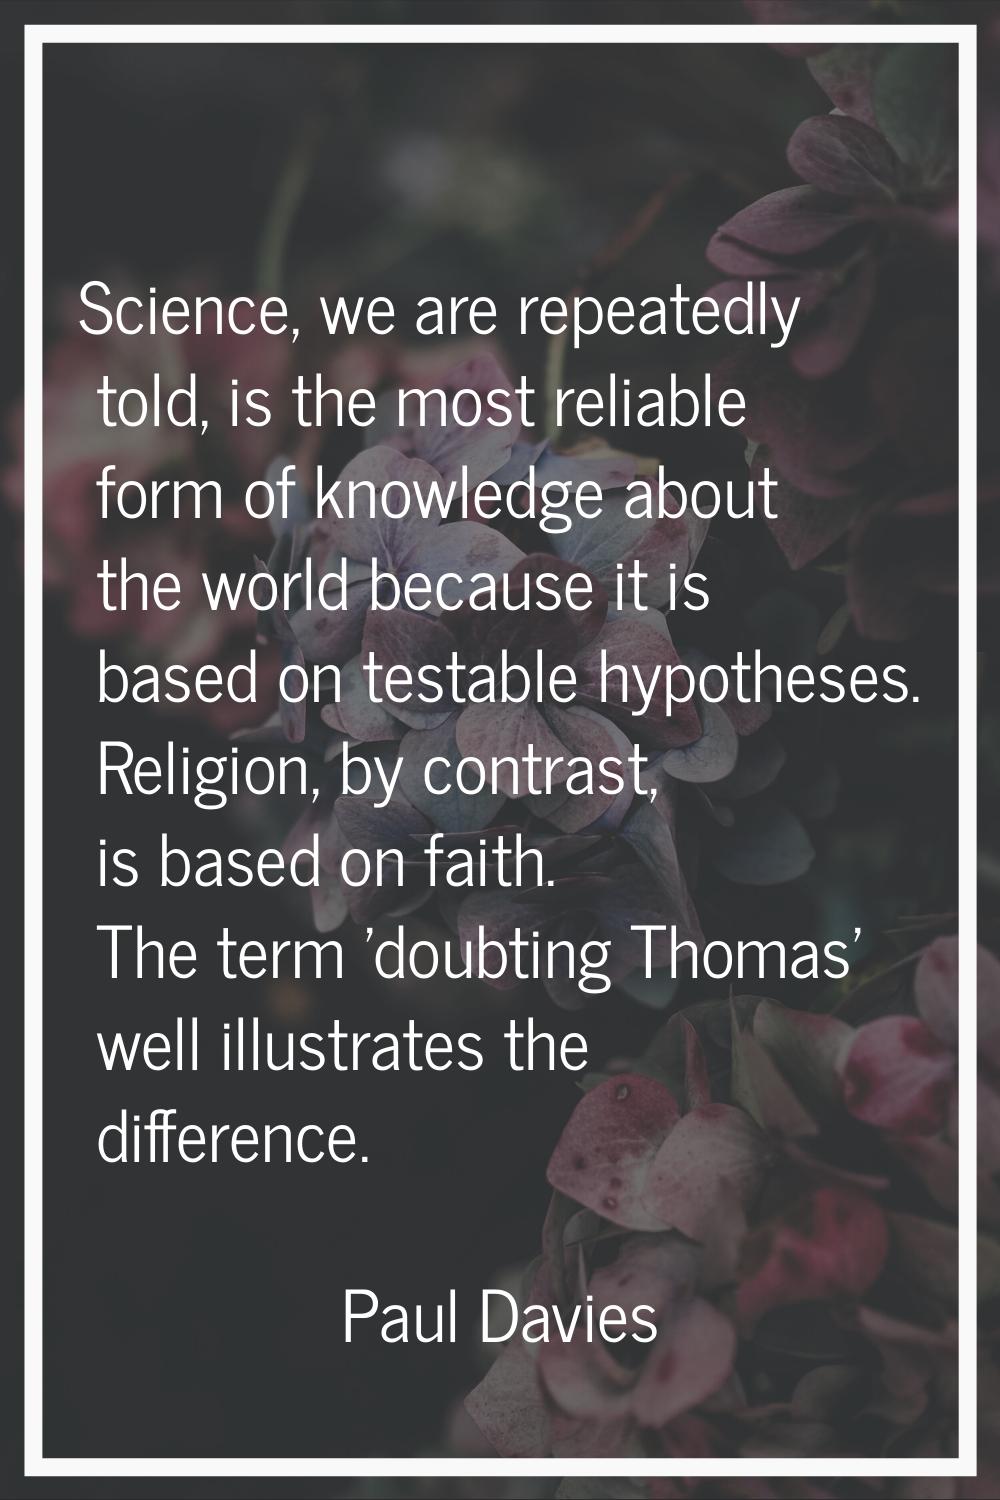 Science, we are repeatedly told, is the most reliable form of knowledge about the world because it 